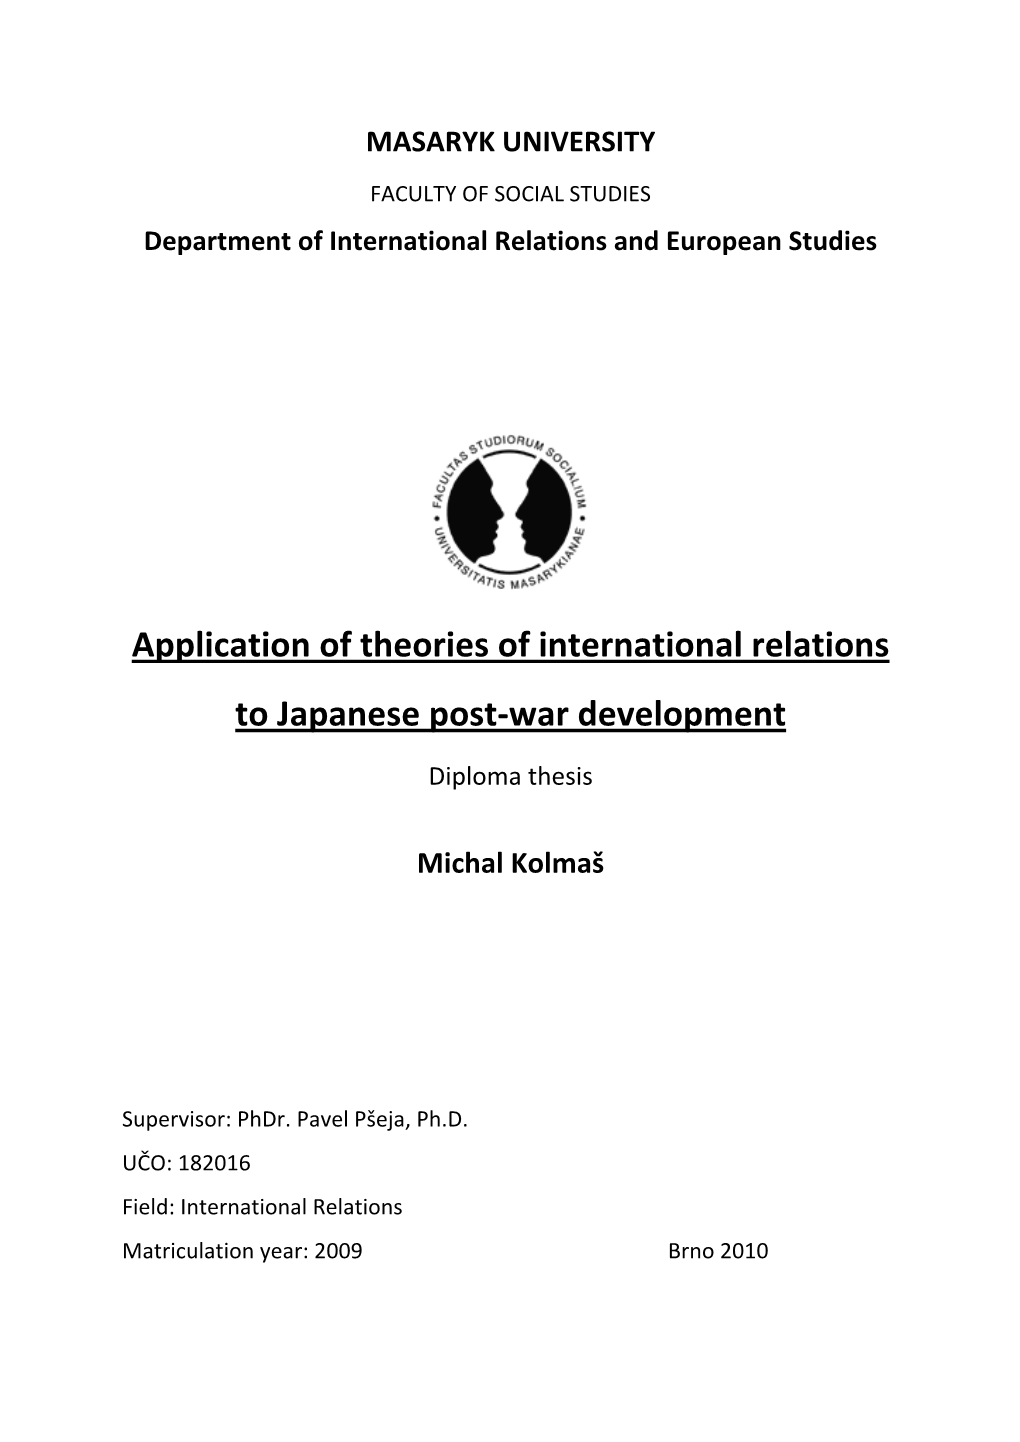 Application of Theories of International Relations to Japanese Post-War Development